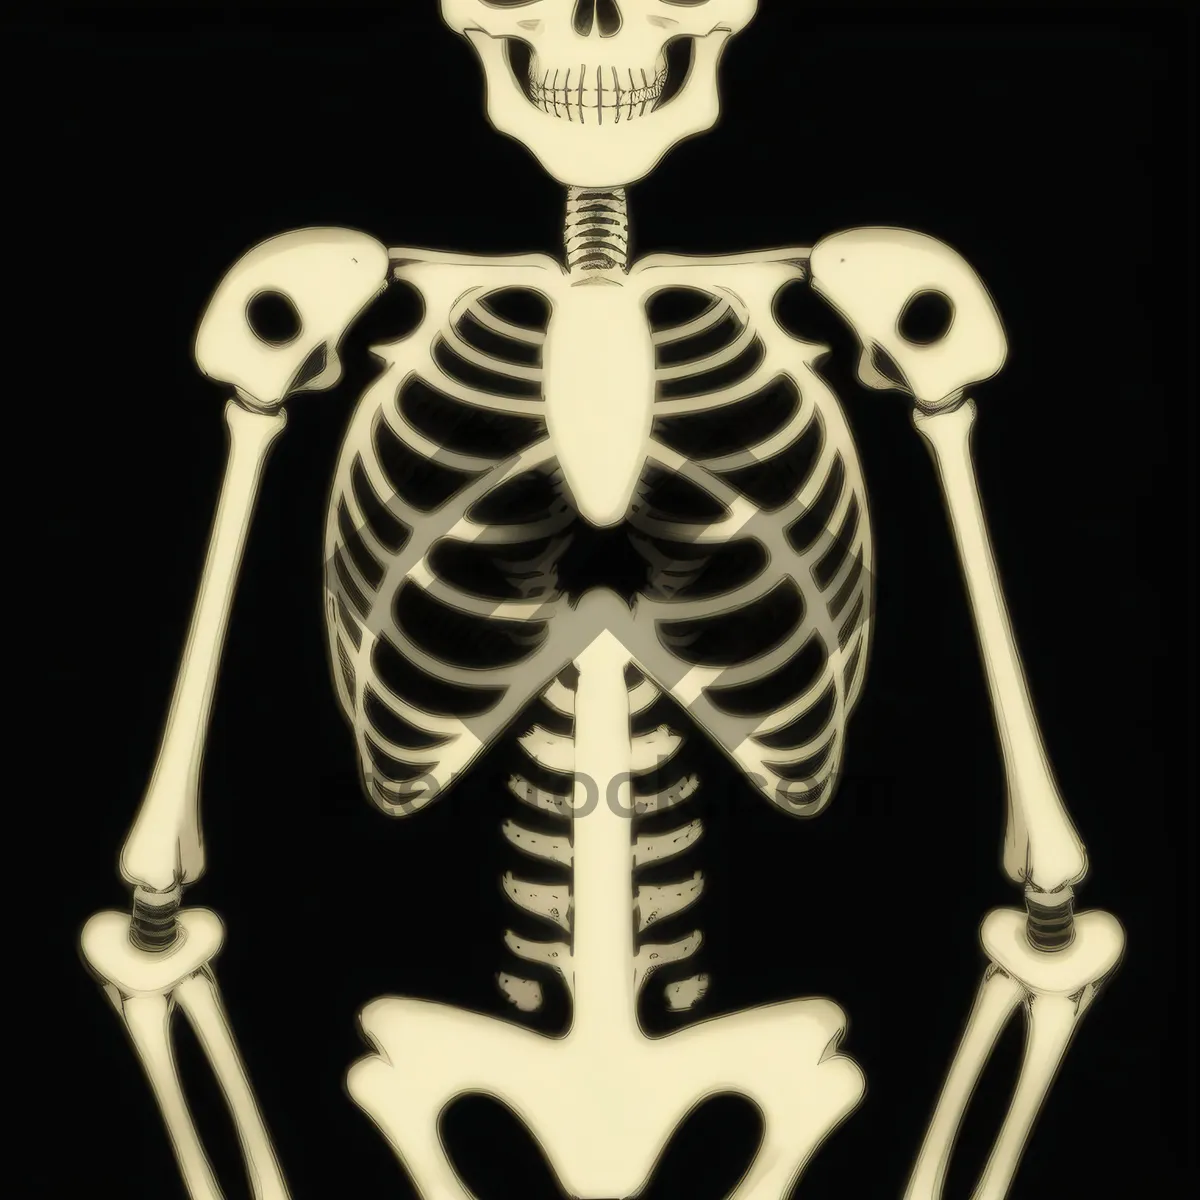 Picture of 3D Human Skeleton Anatomy Image: Spinal Anatomy and Body Structure